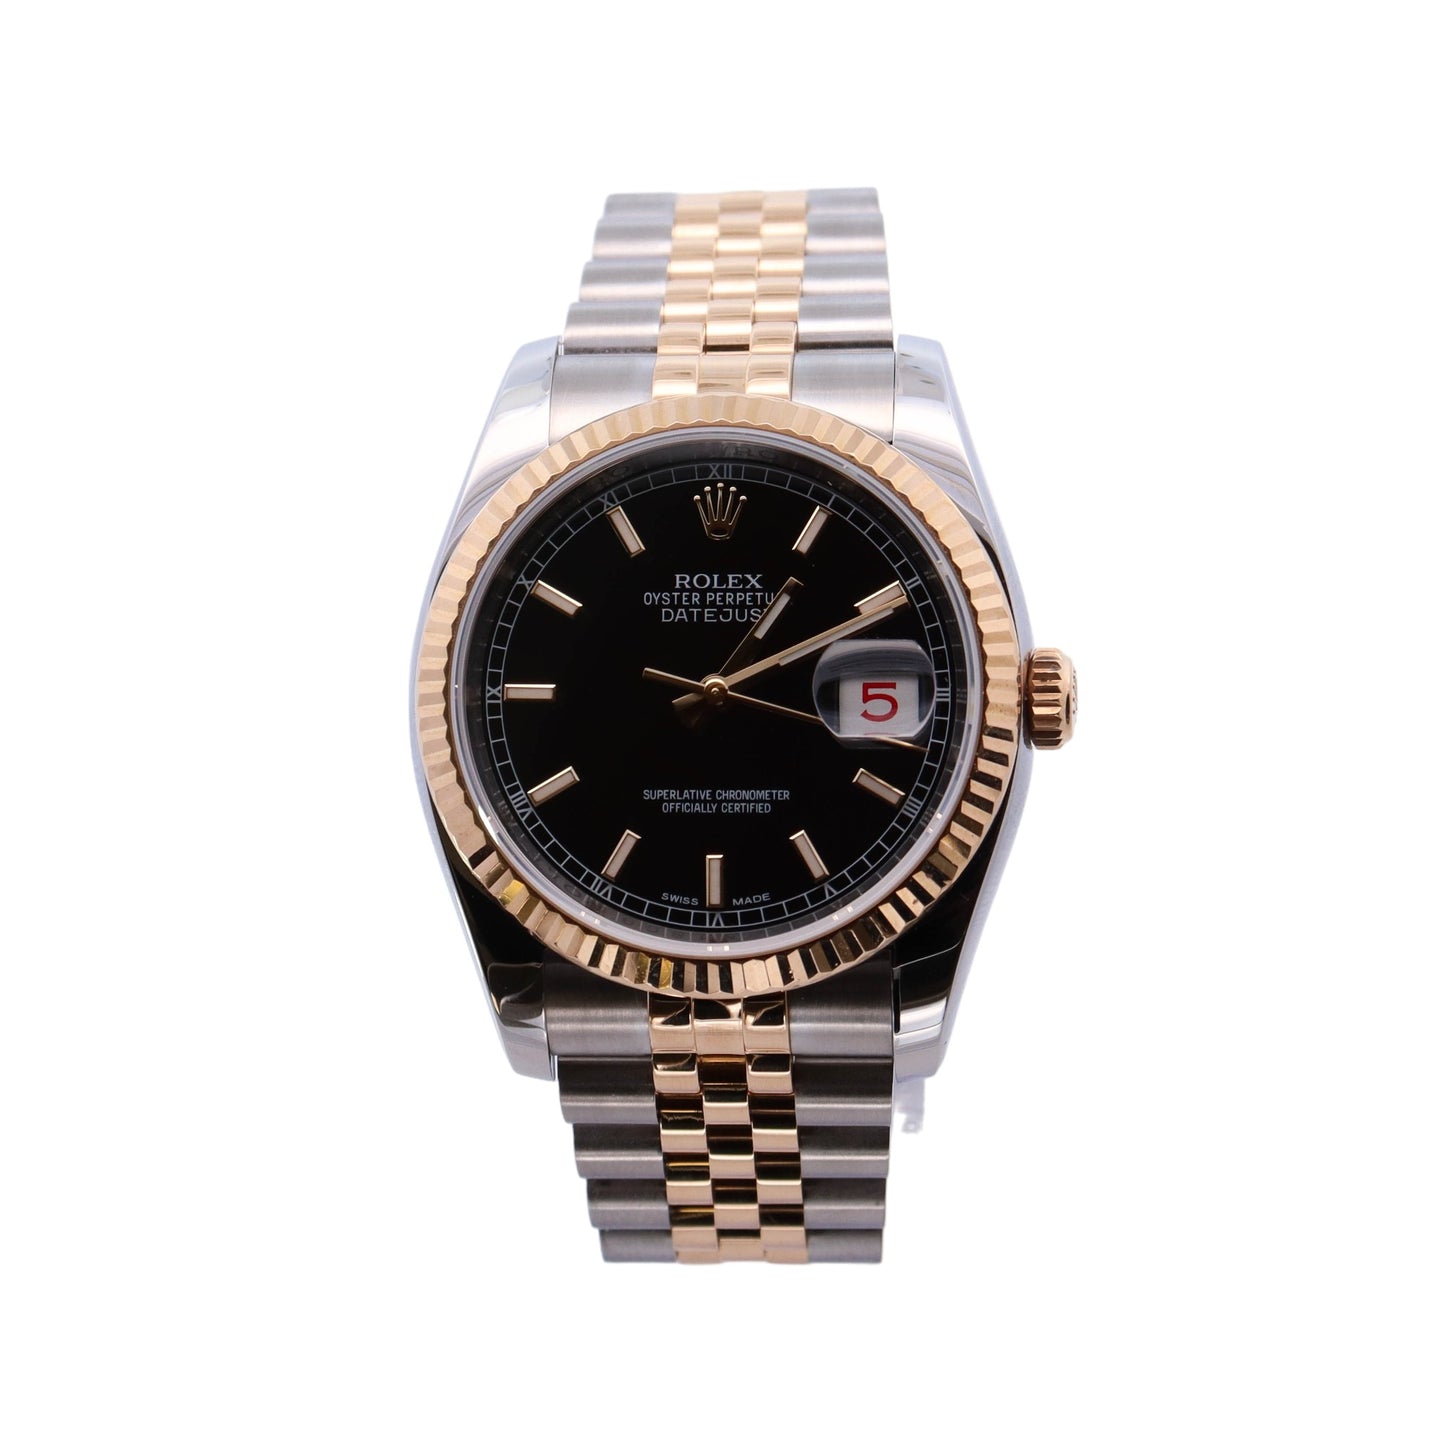 Rolex Datejust Two-Tone Stainless Steel & Yellow Gold 36mm Black Stick Dial Watch Reference# 116233 - Happy Jewelers Fine Jewelry Lifetime Warranty